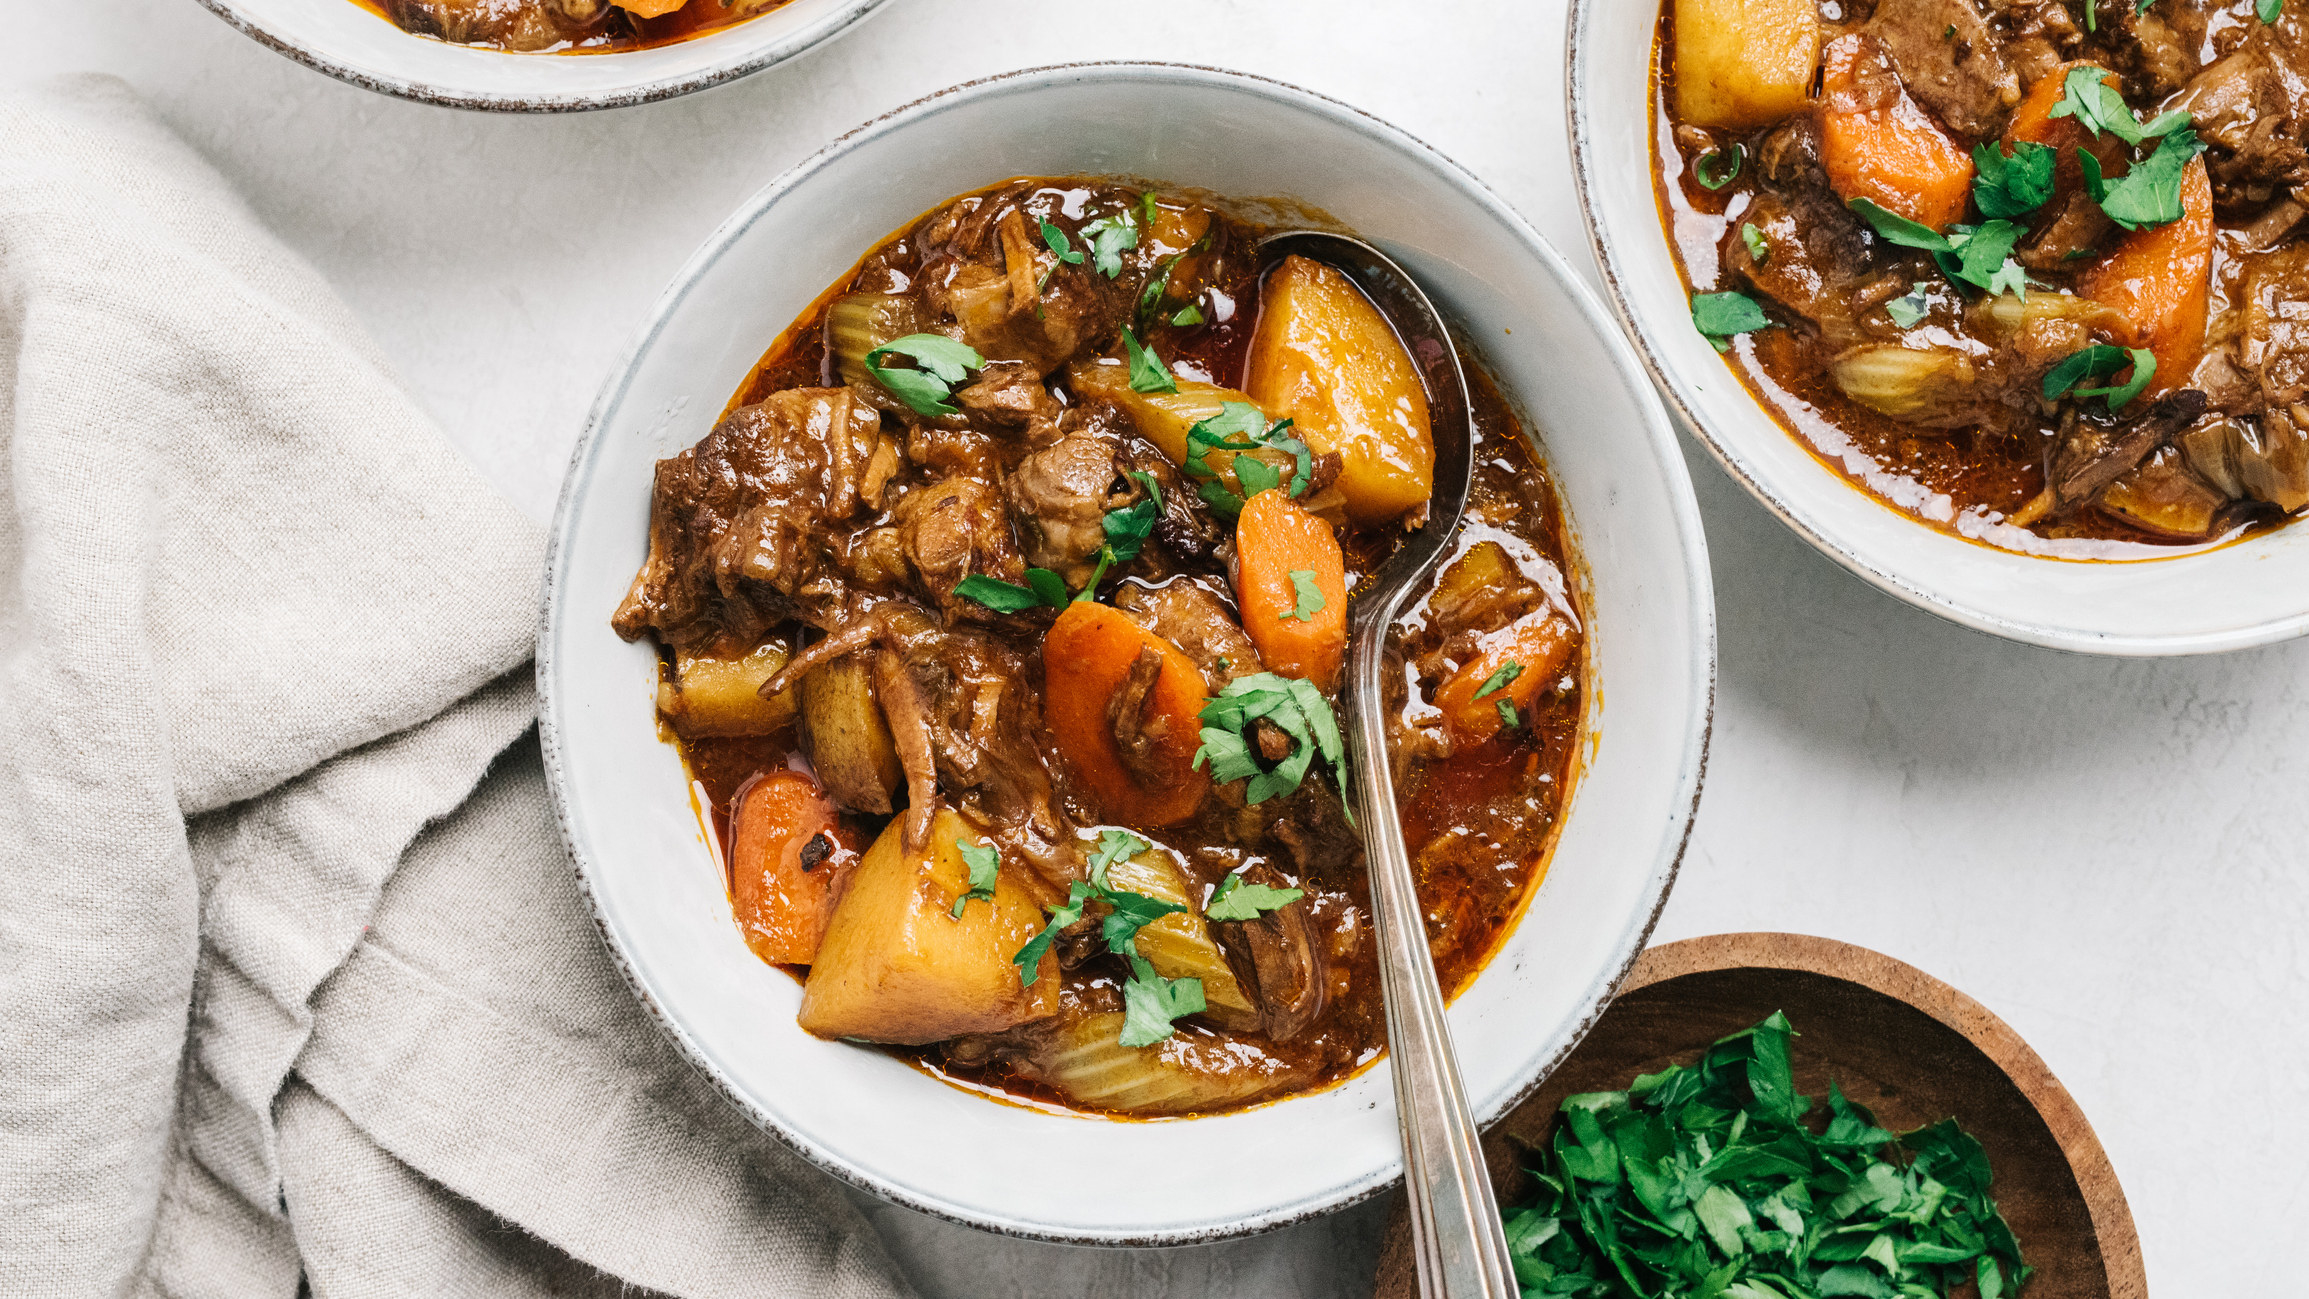 Bowls of beef stew with potatoes.